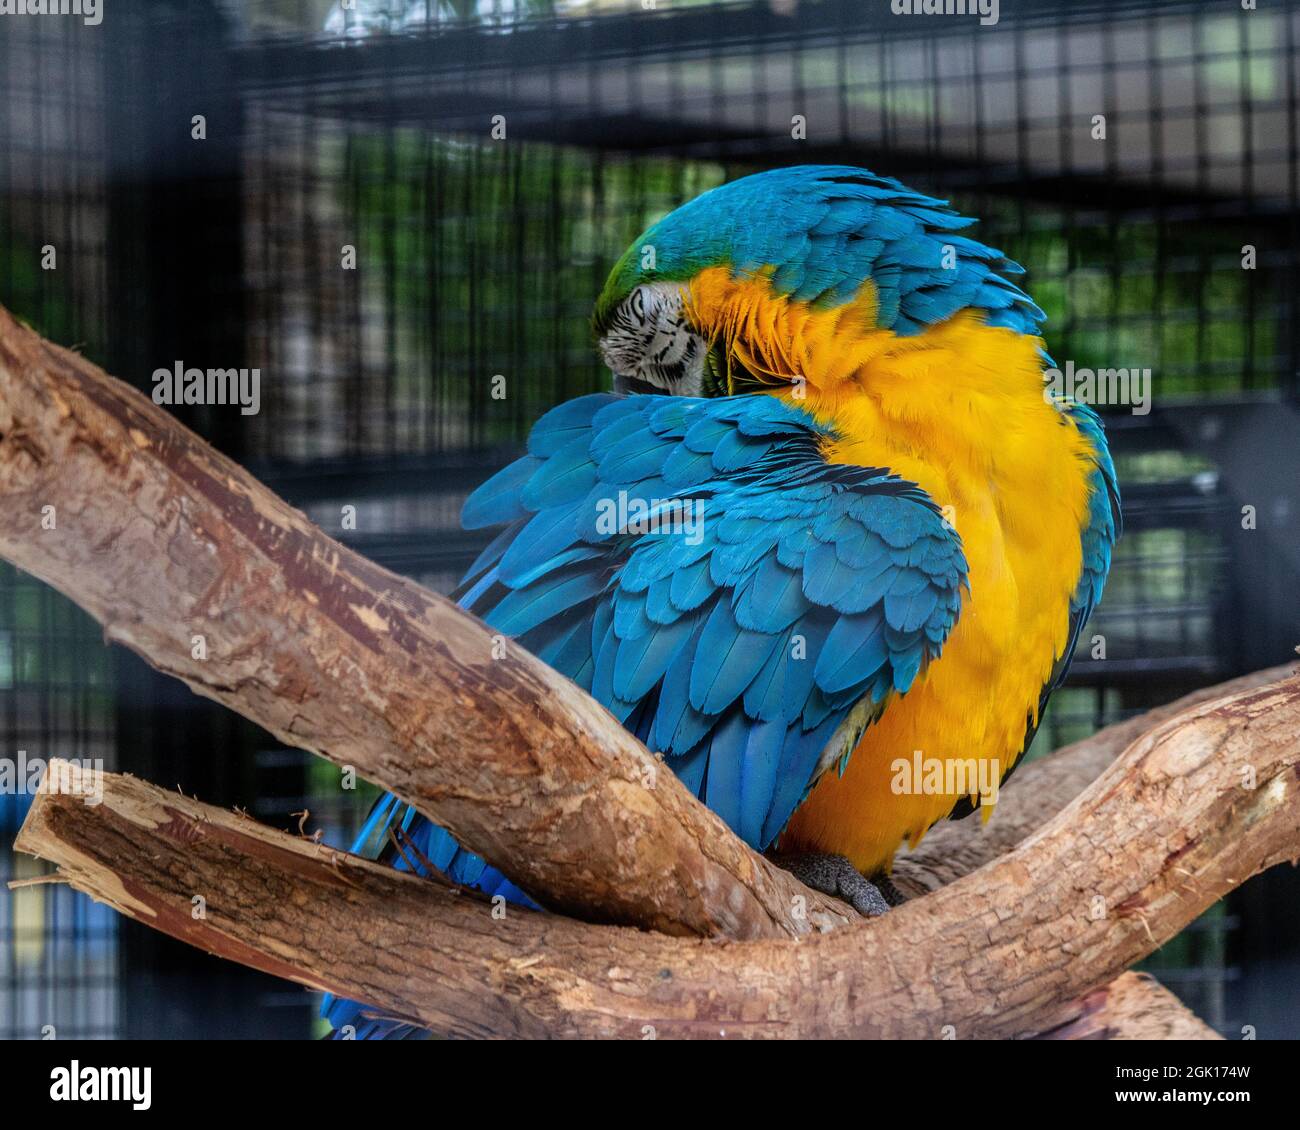 This is an image of a stunning bird who lives at the Flamingo Gardens in Florida. Stock Photo